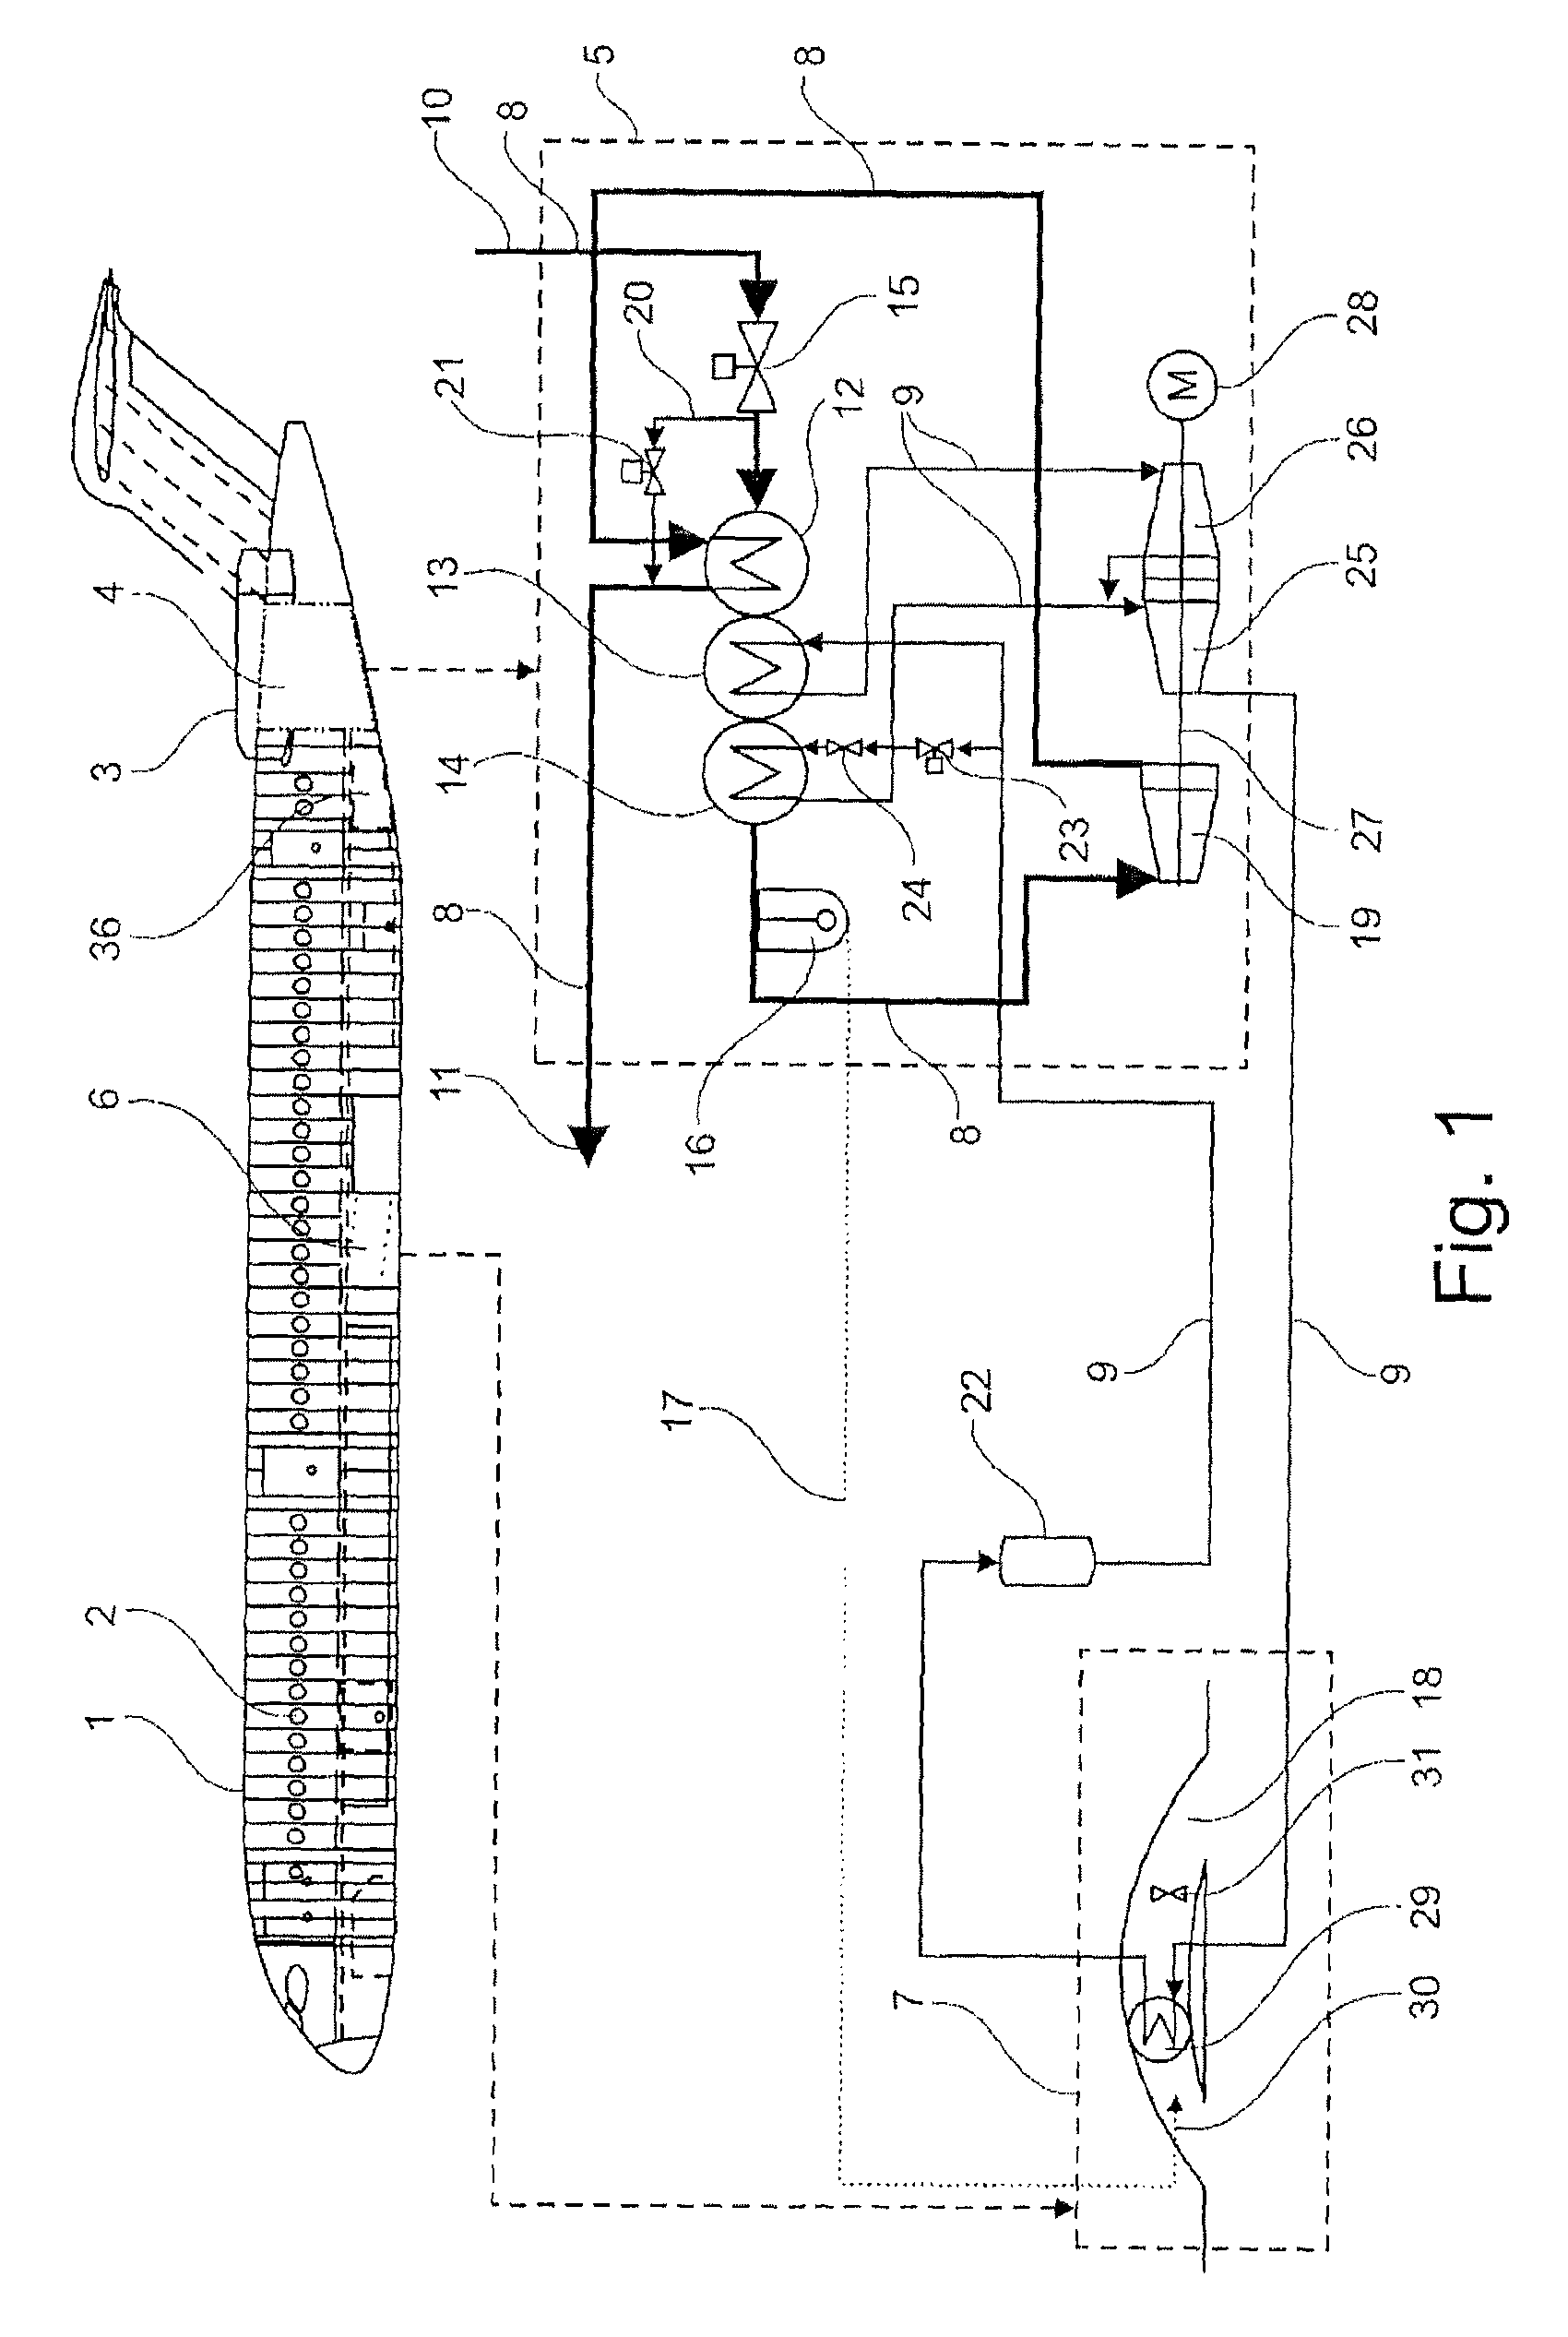 Aircraft air conditioning system comprising a separate refrigeration cycle